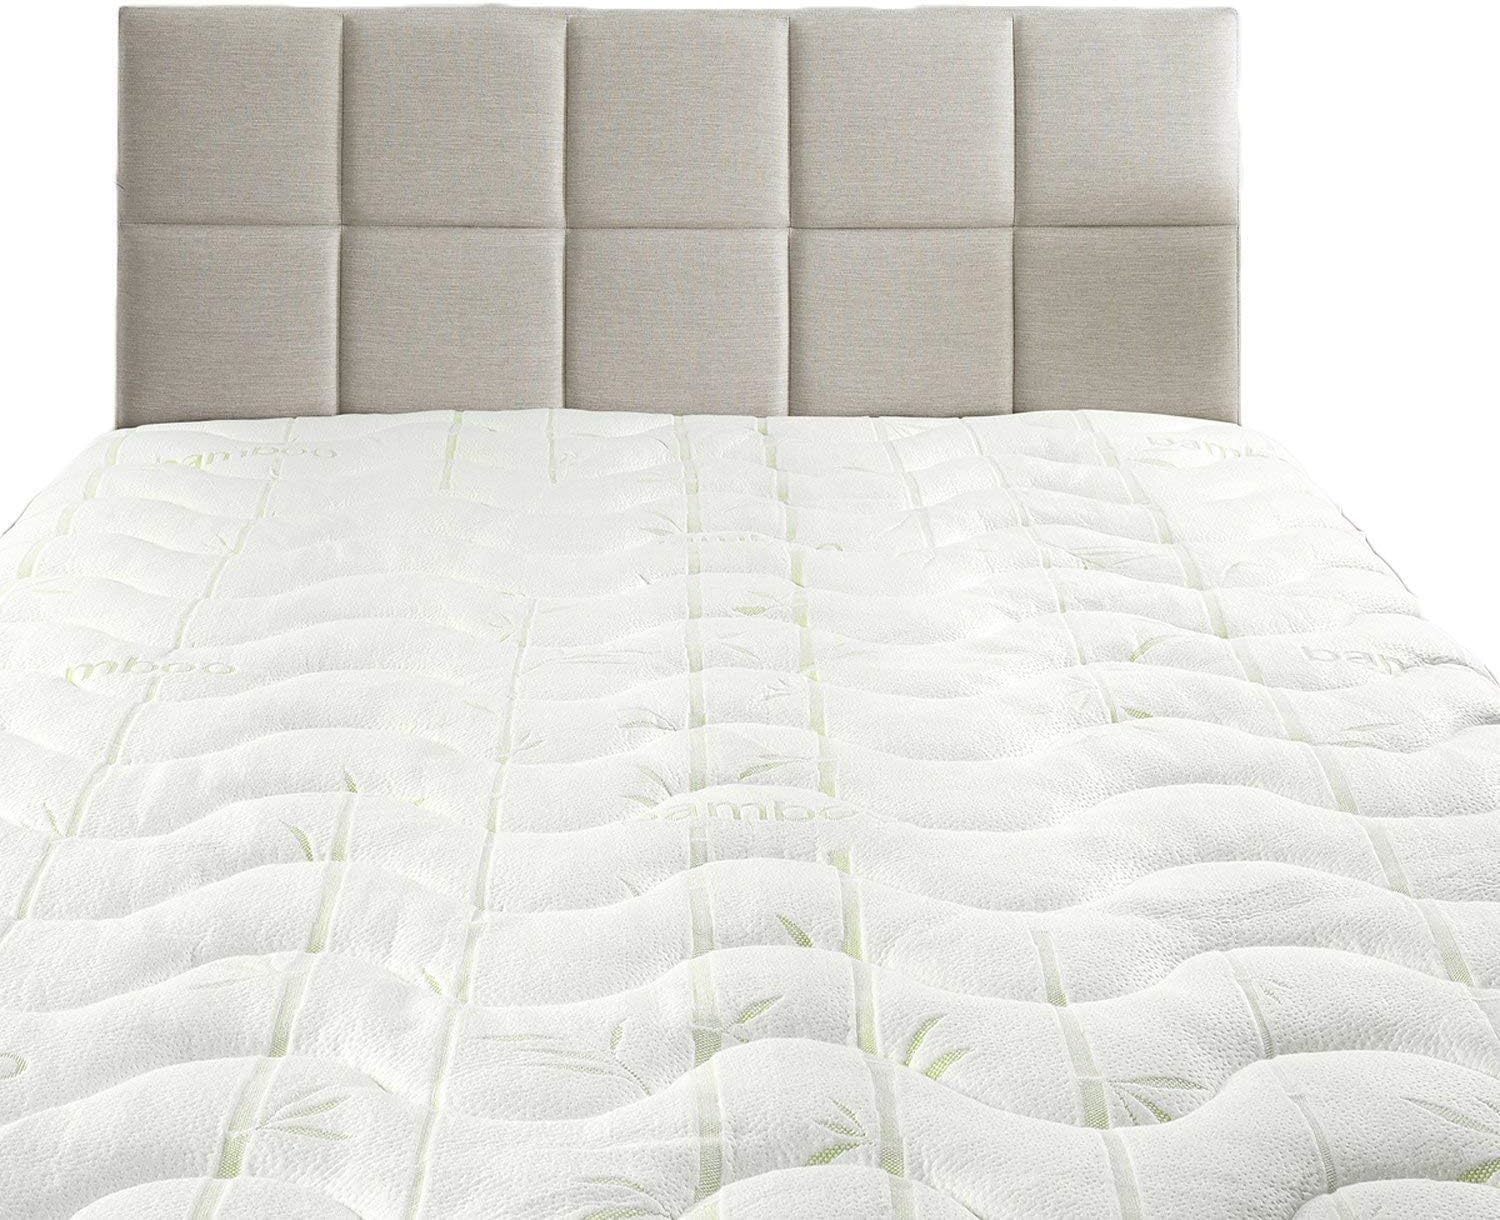 The Queen Size Extra Plush And Soft Mattress Pad From Royal Hotel Bedding Is - $97.98